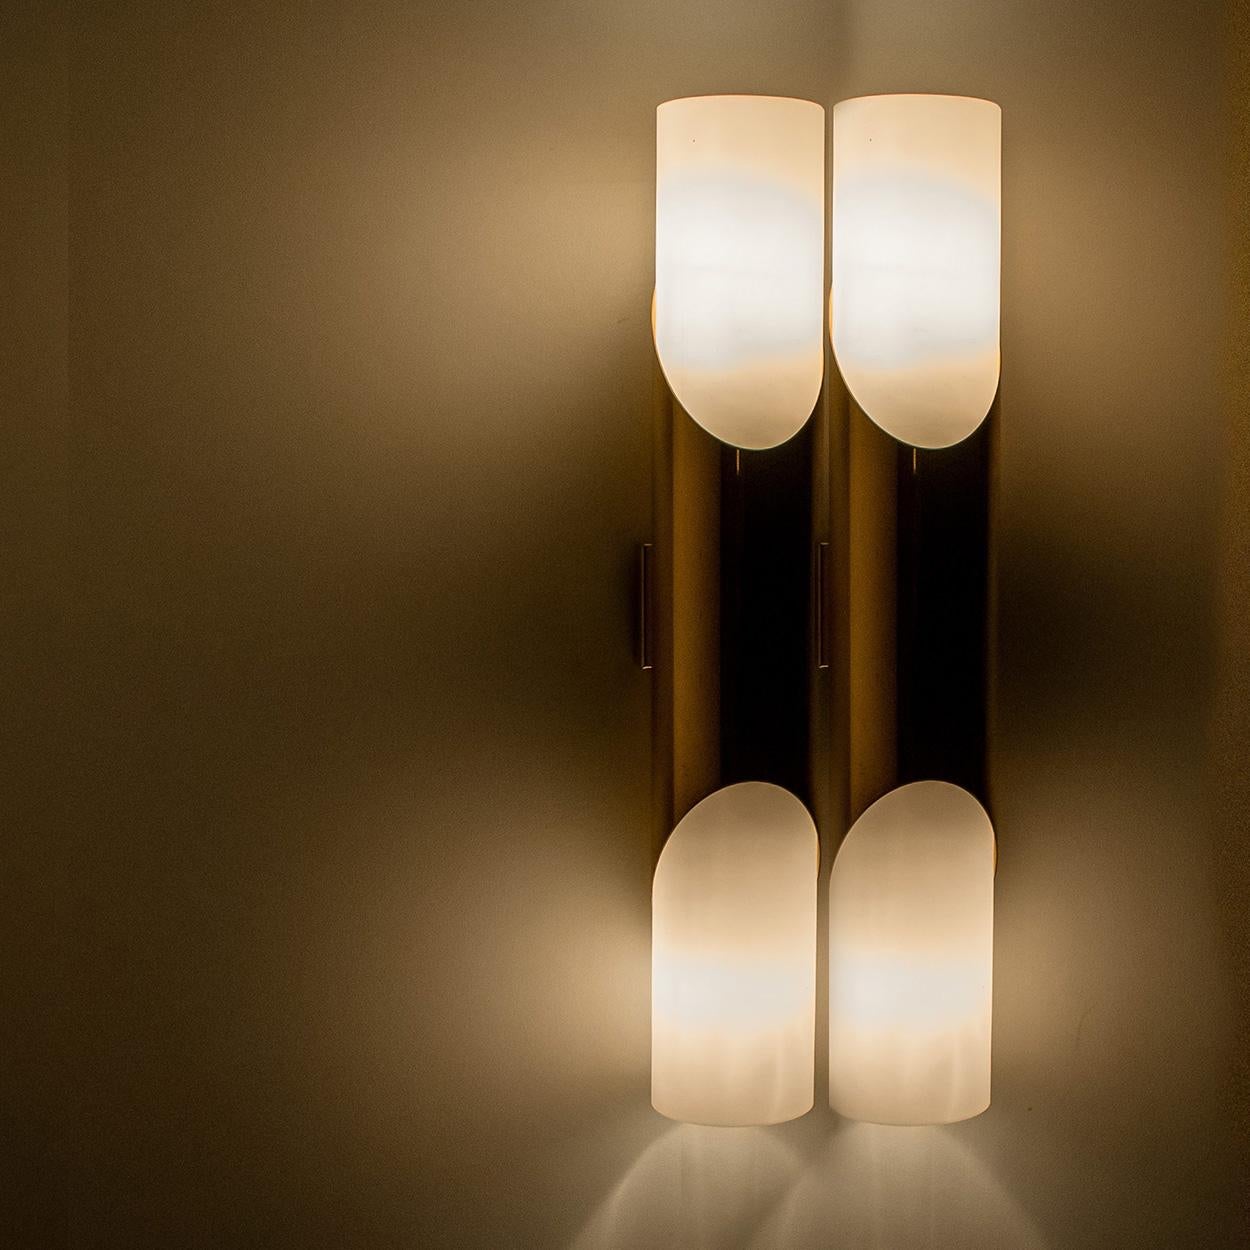 German Several Wall Sconces or Wall Lights in the Style of RAAK Amsterdam, 1970 For Sale